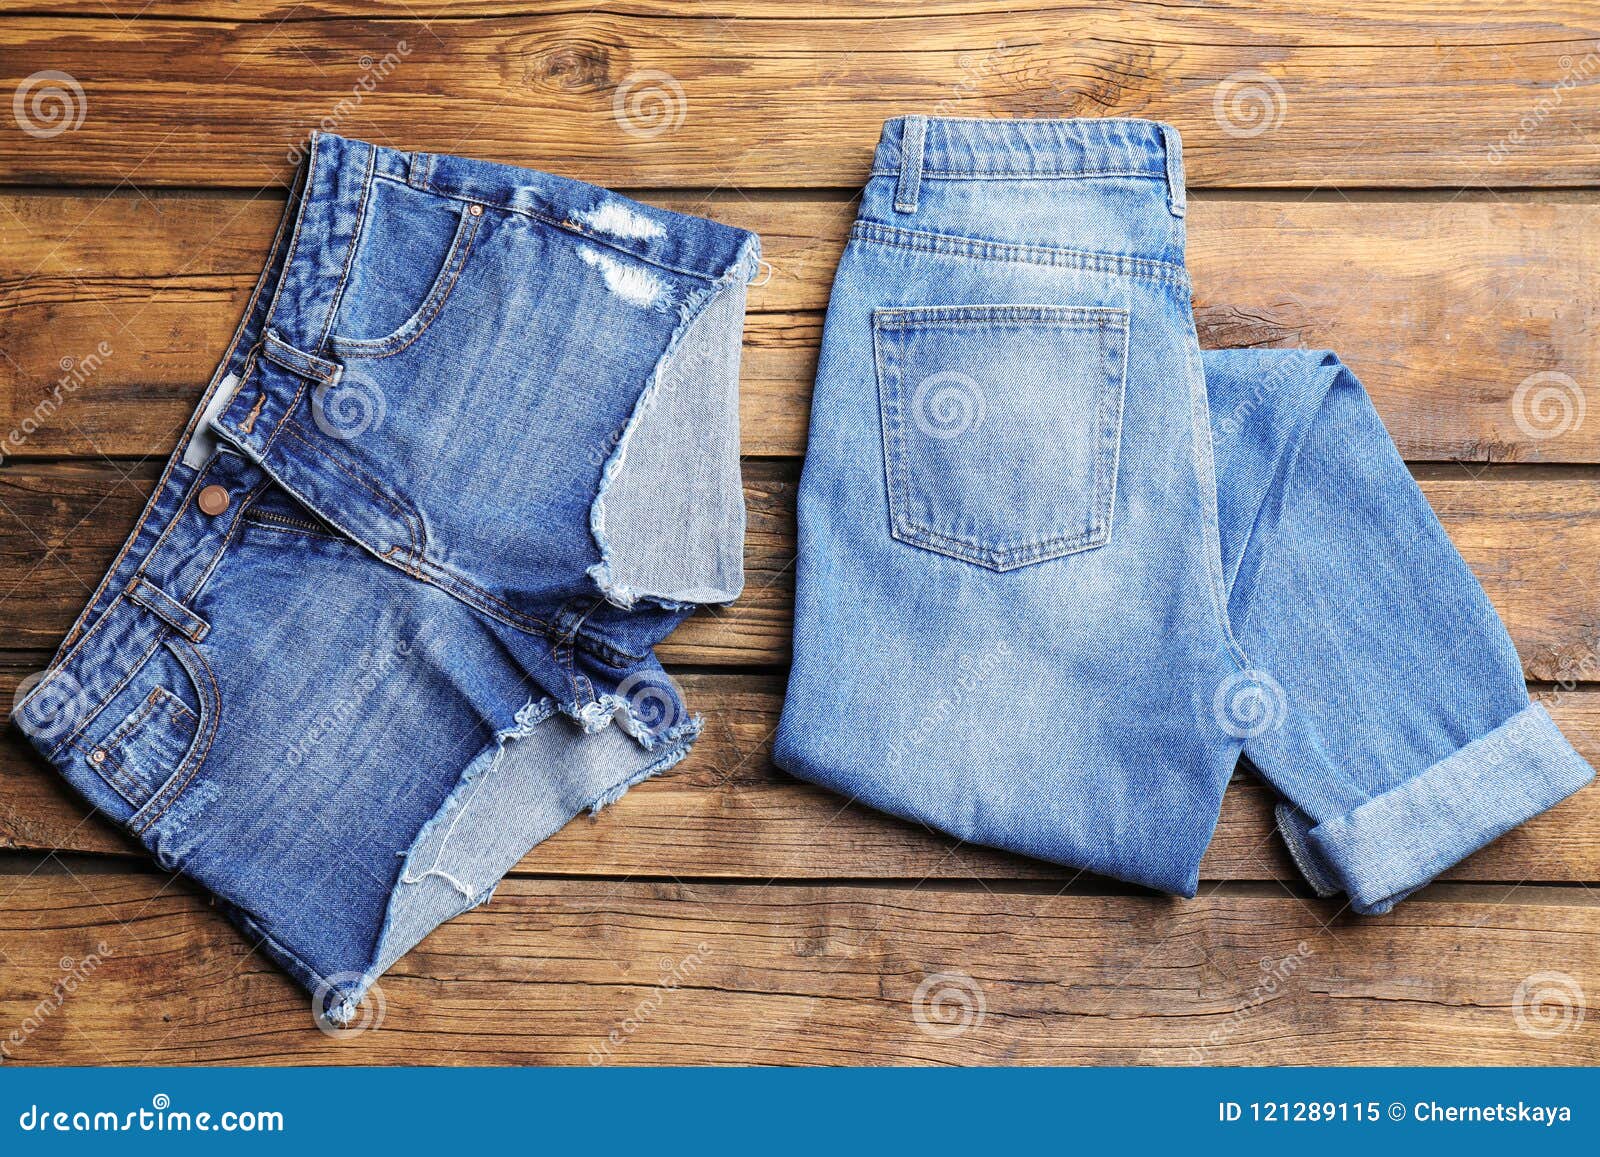 Blue Jeans and Denim Shorts Stock Image - Image of outerwear, object ...